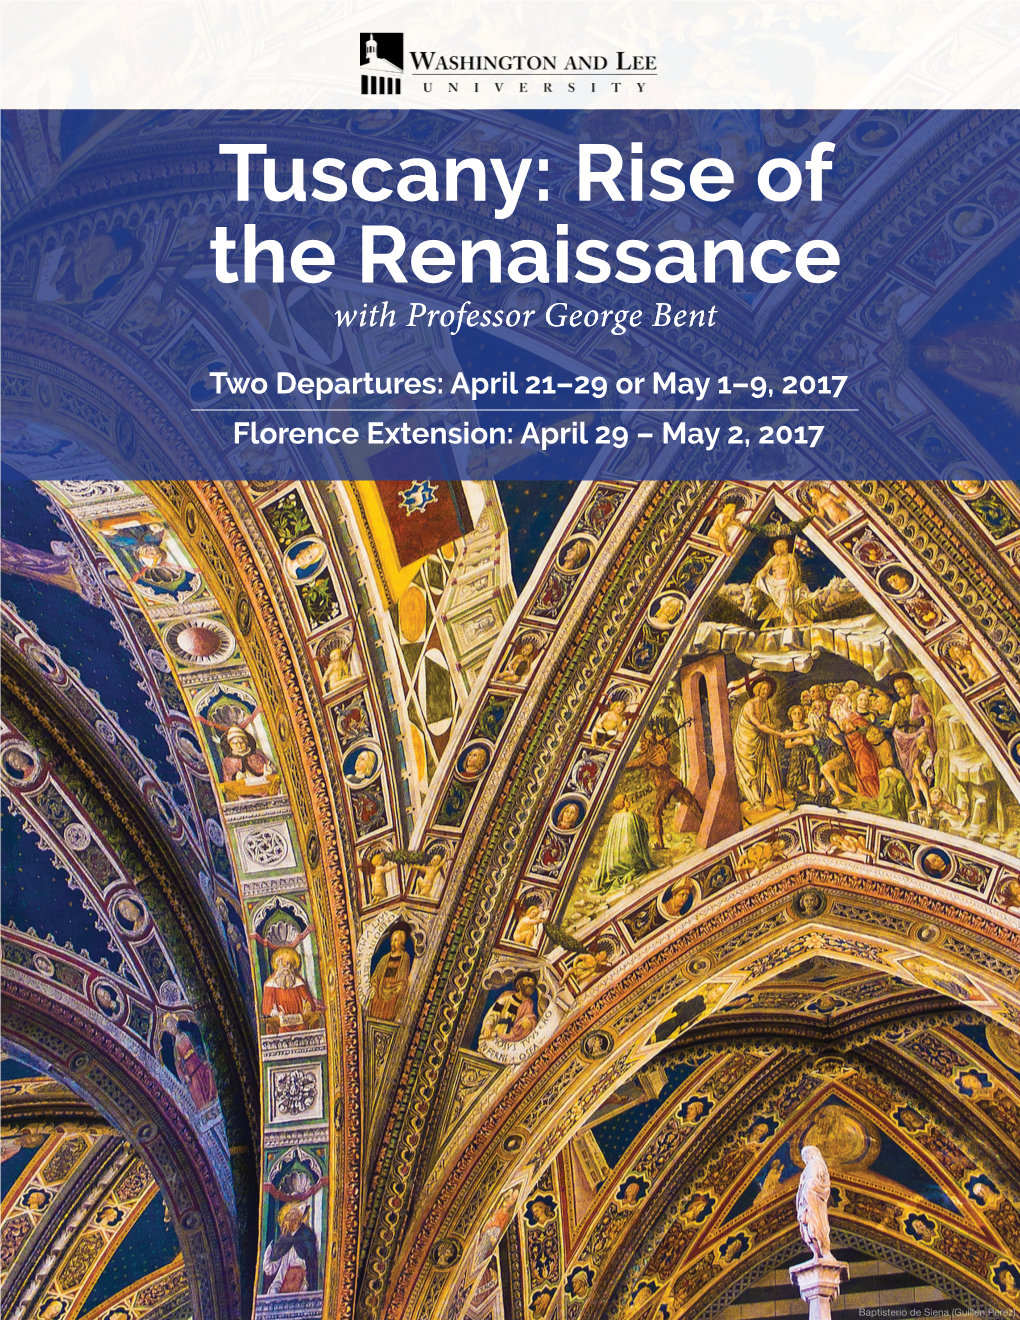 Tuscany: Rise of the Renaissance with Professor George Bent